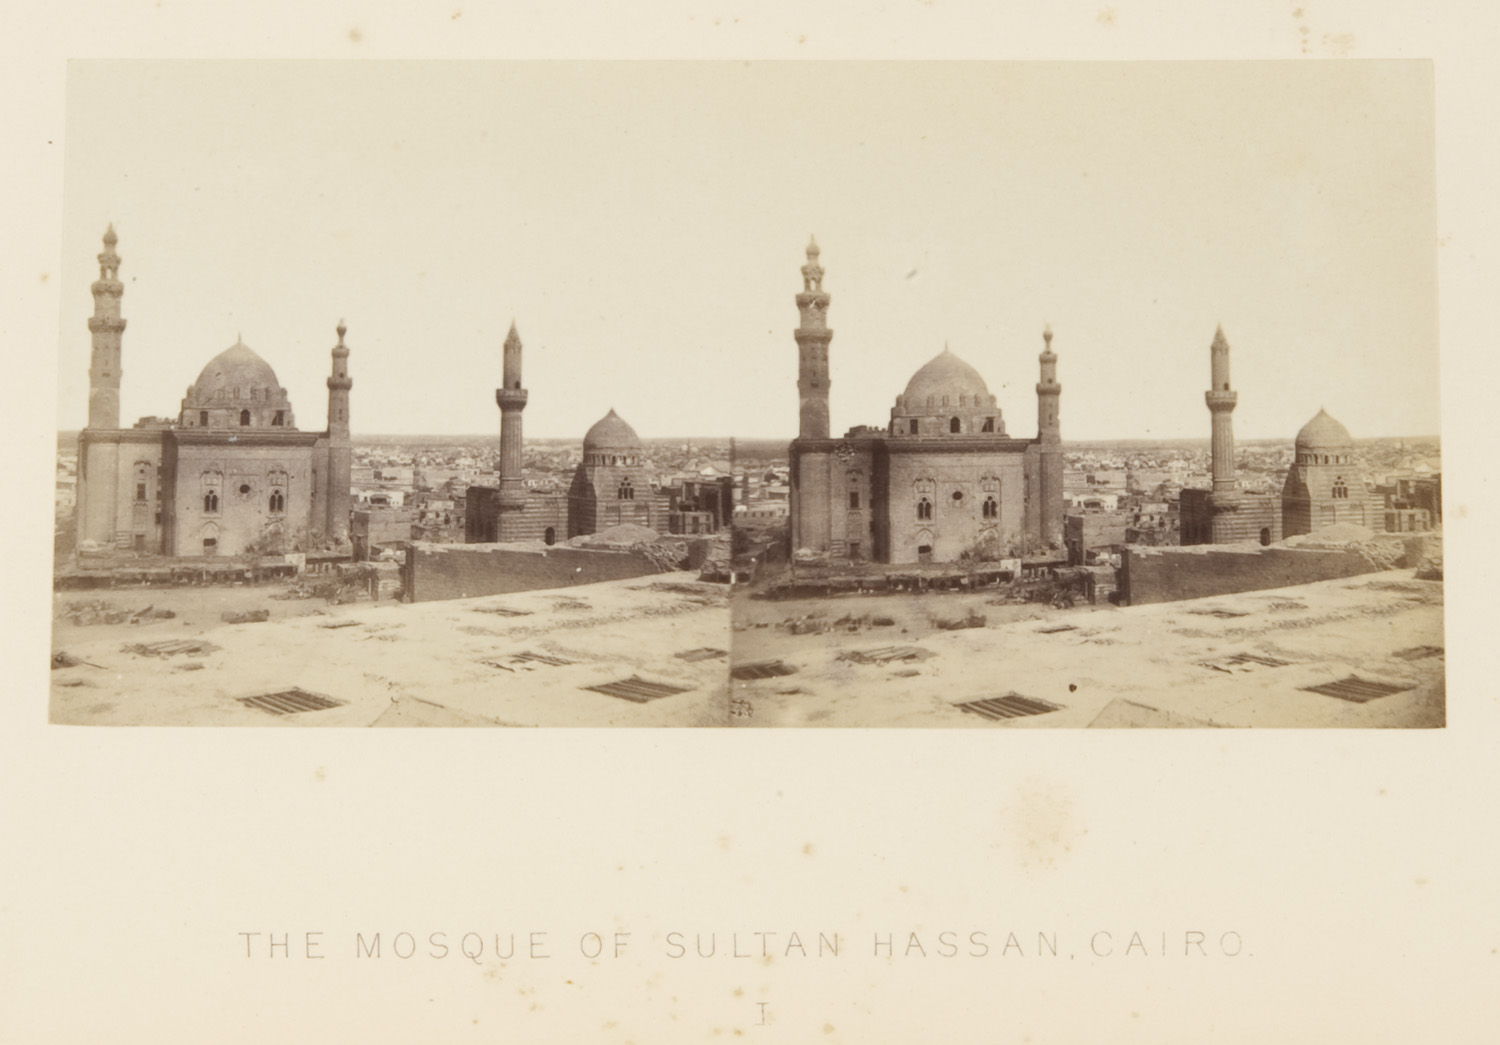 'The Mosque of Sultan Hassan, Cairo' ' from Francis Frith's Egypt, Nubia, and Ethiopia, illustrated by one hundred Stereoscopic photographs. London, 1862 (St Andrews copy at Photo DT47.F8)